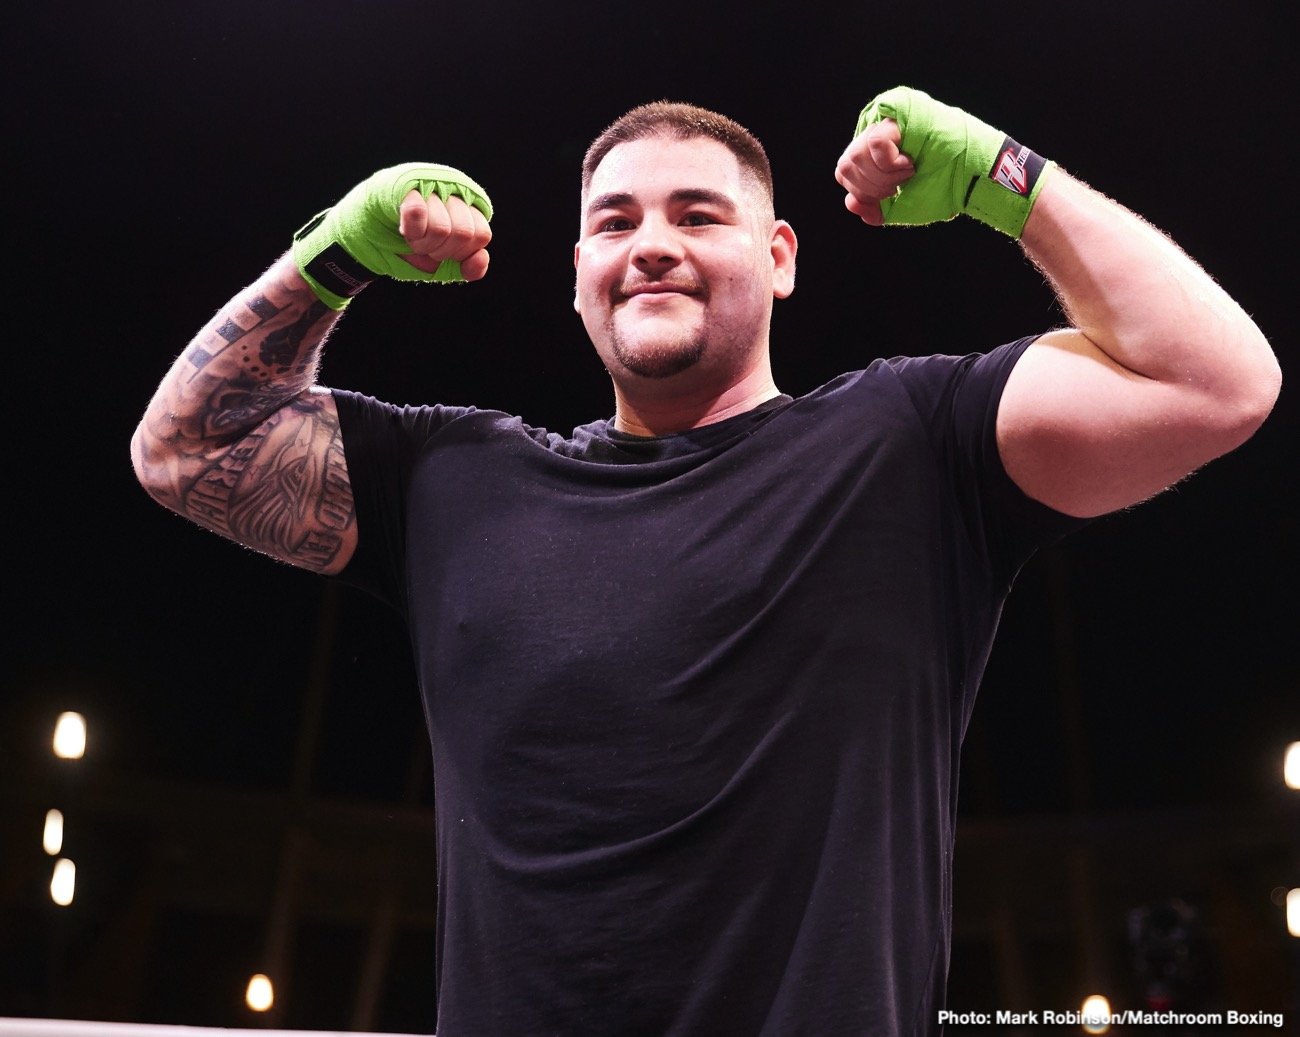 Image: 'Andy Ruiz Jr. will benefit being trained by Reynoso' - Mikey Garcia